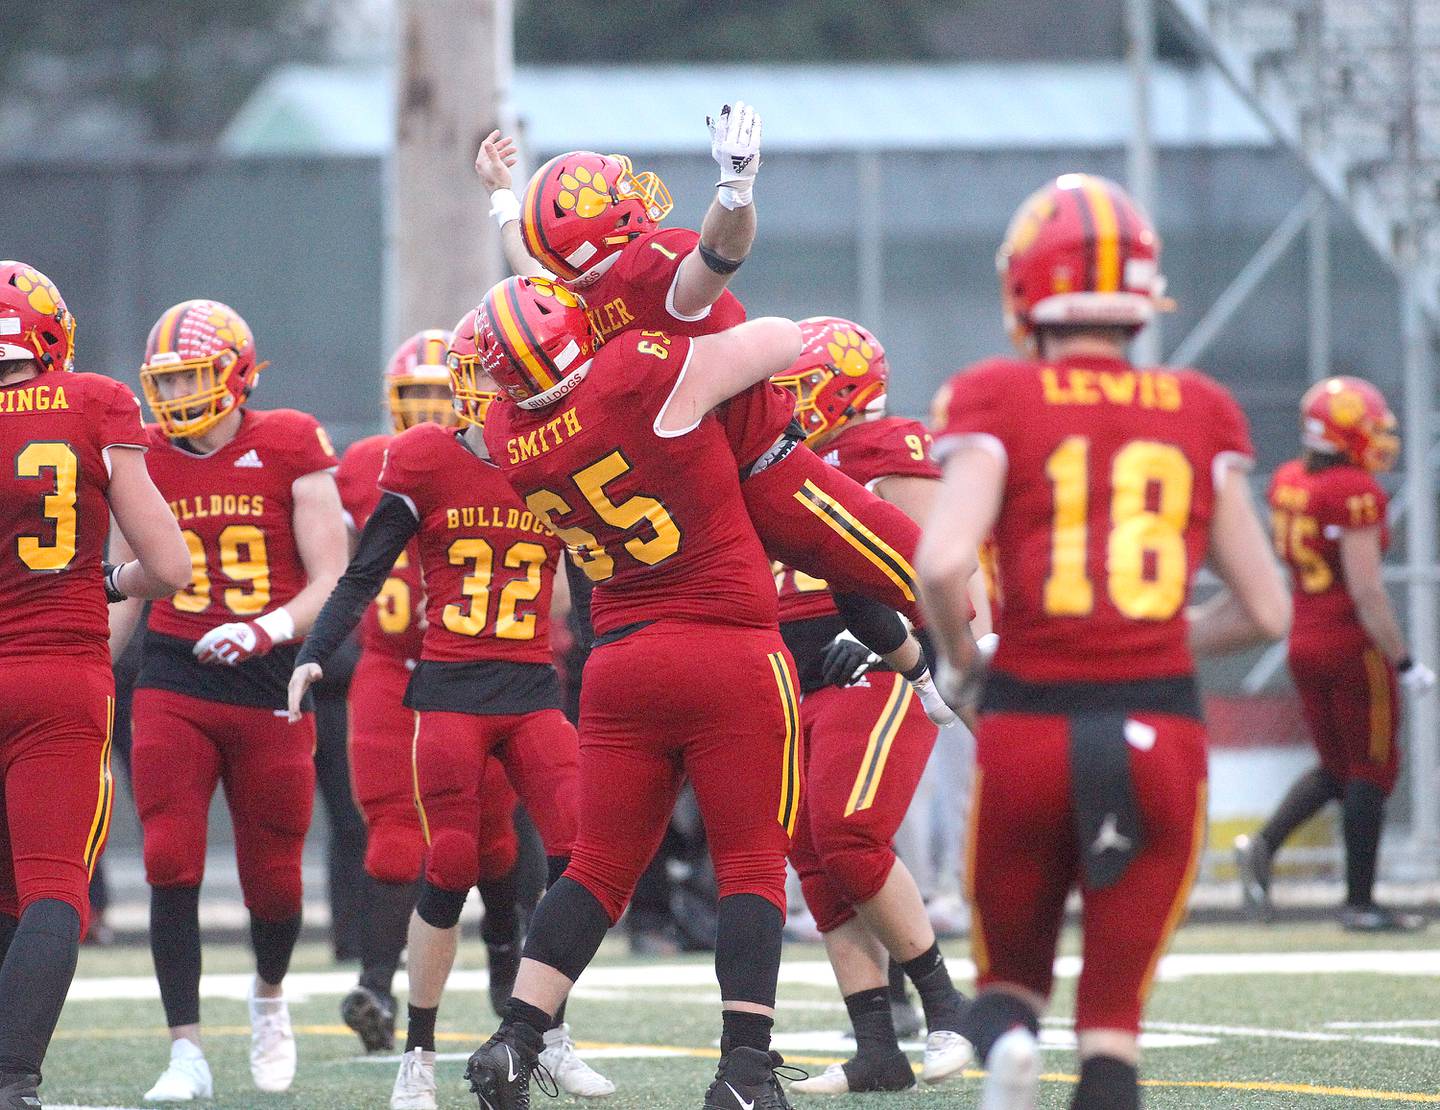 Batavia's Jon Smith (65) lifts up teammate Trey Urwiler in celebration of a touchdown during a game against St. Charles North at Batavia on Friday, March 26, 2021.